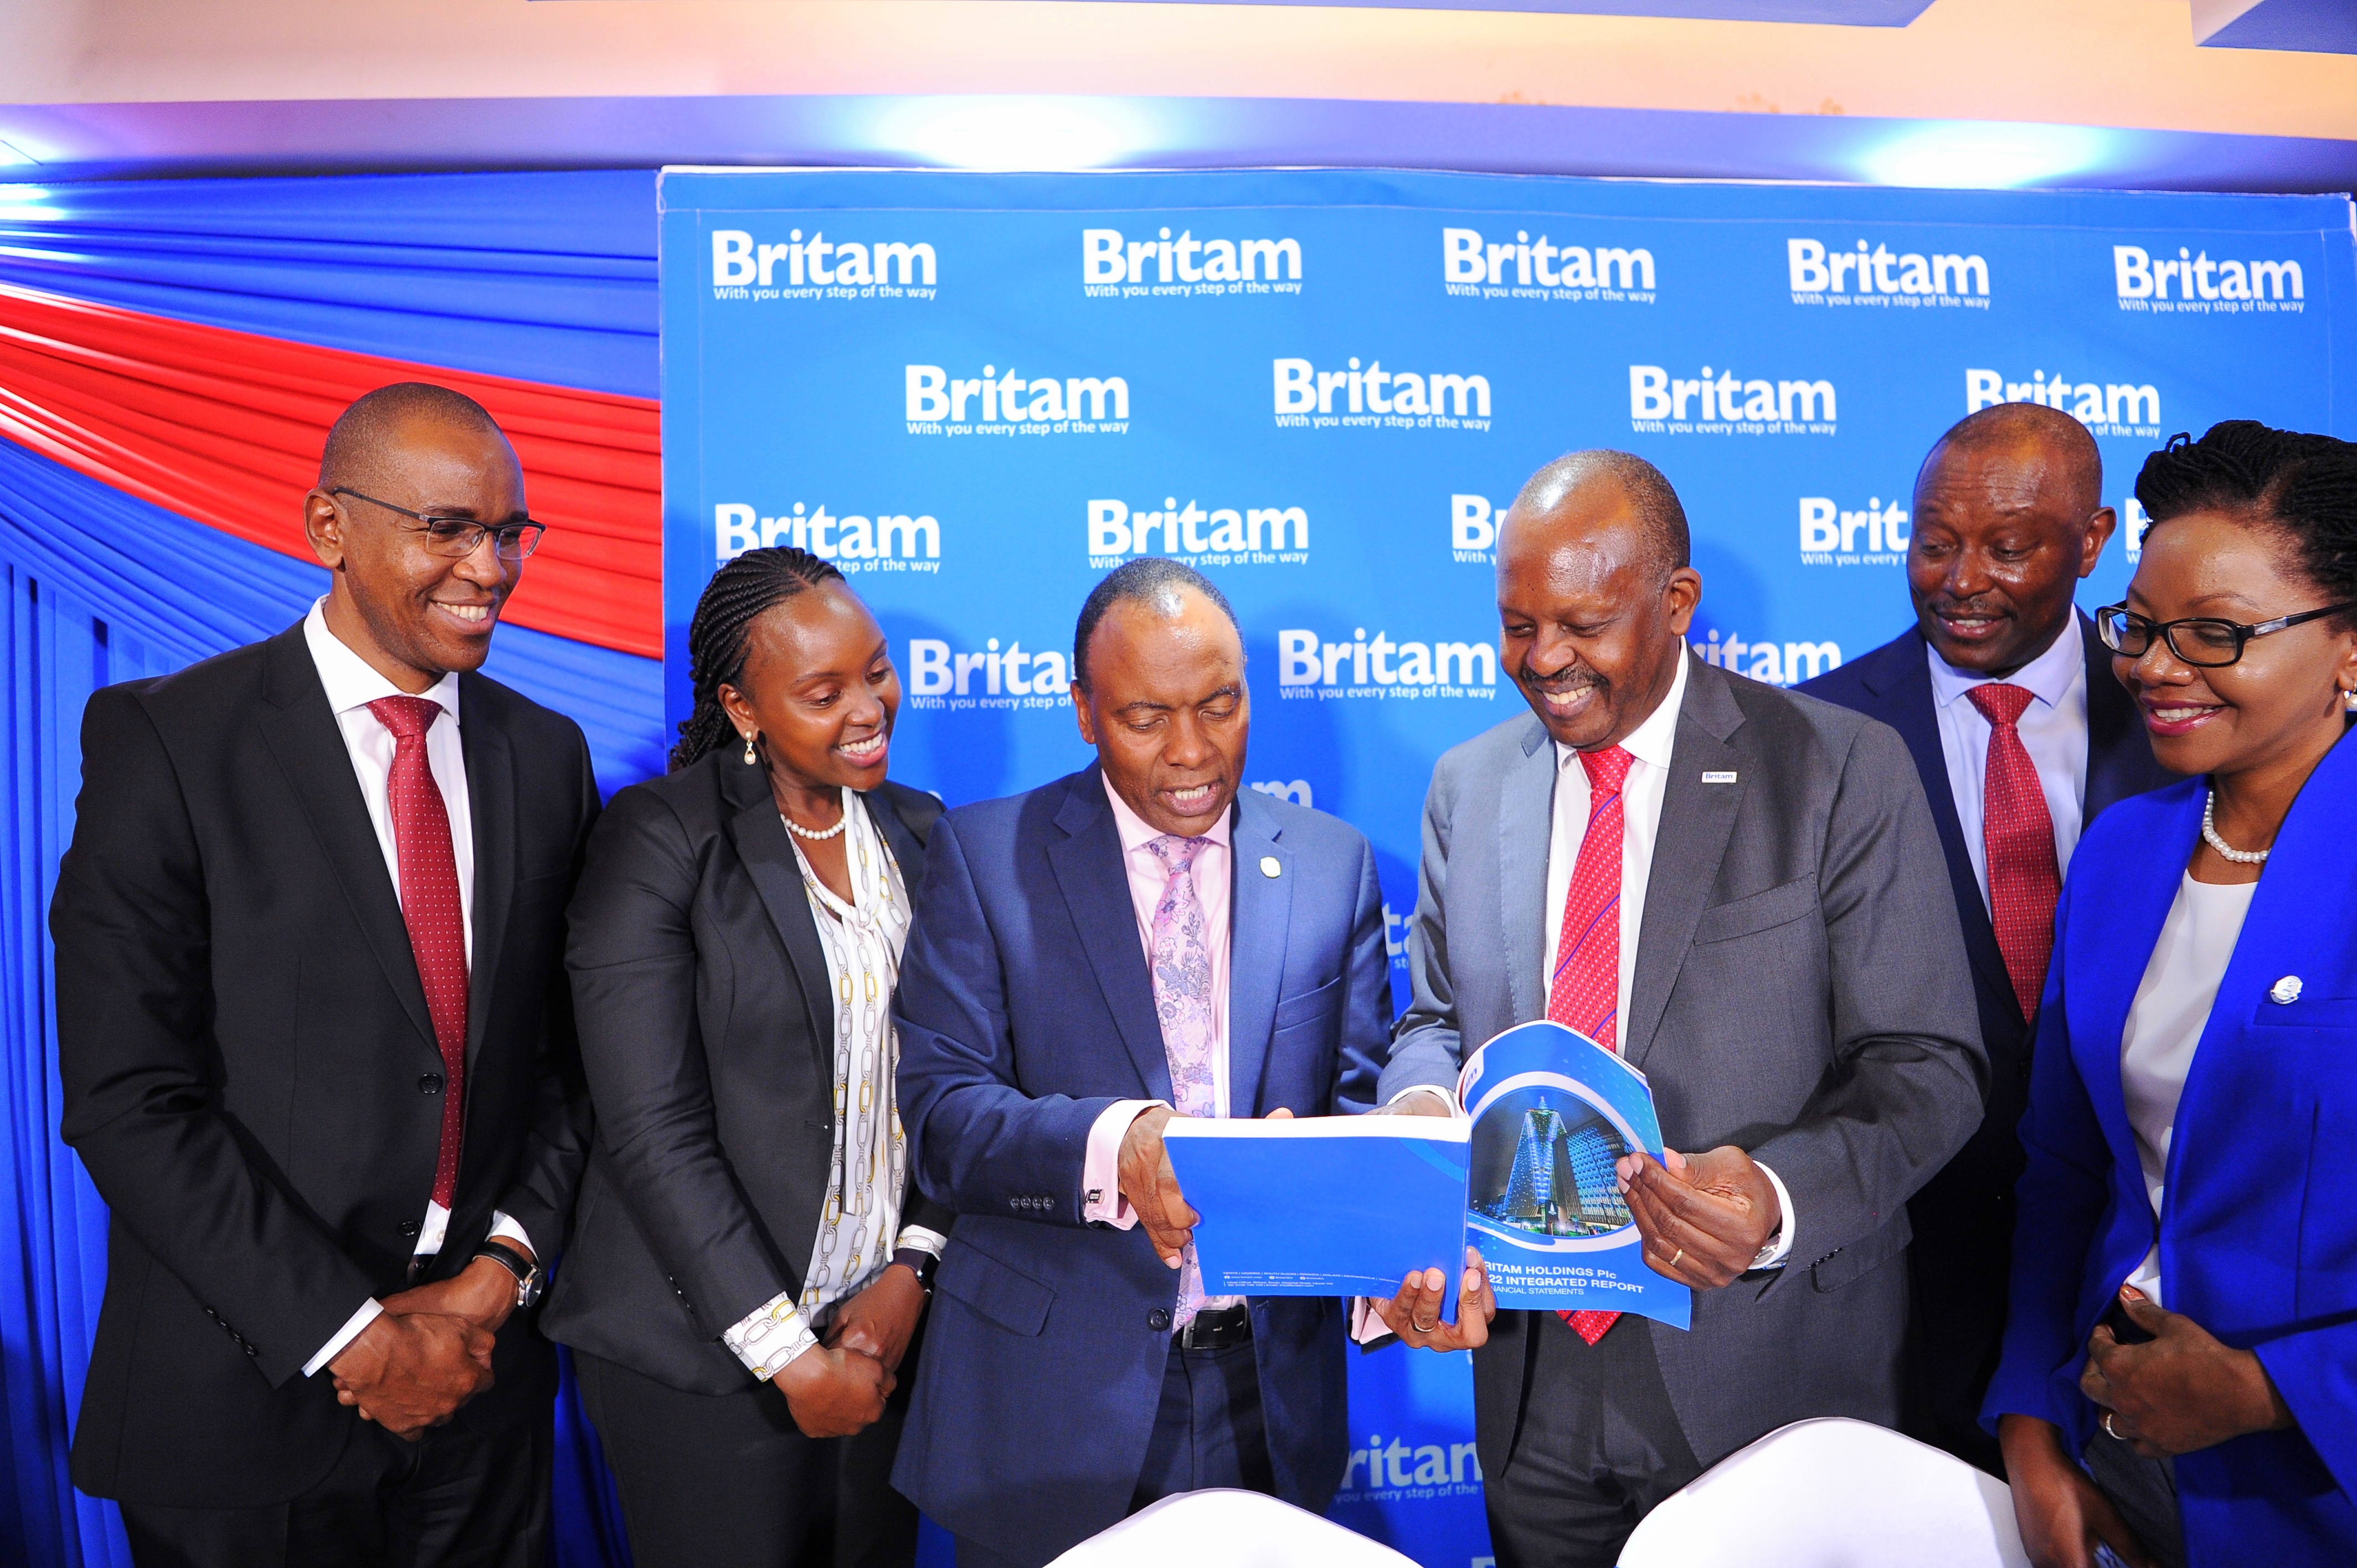 Britam Holds its 27th Annual General Meeting